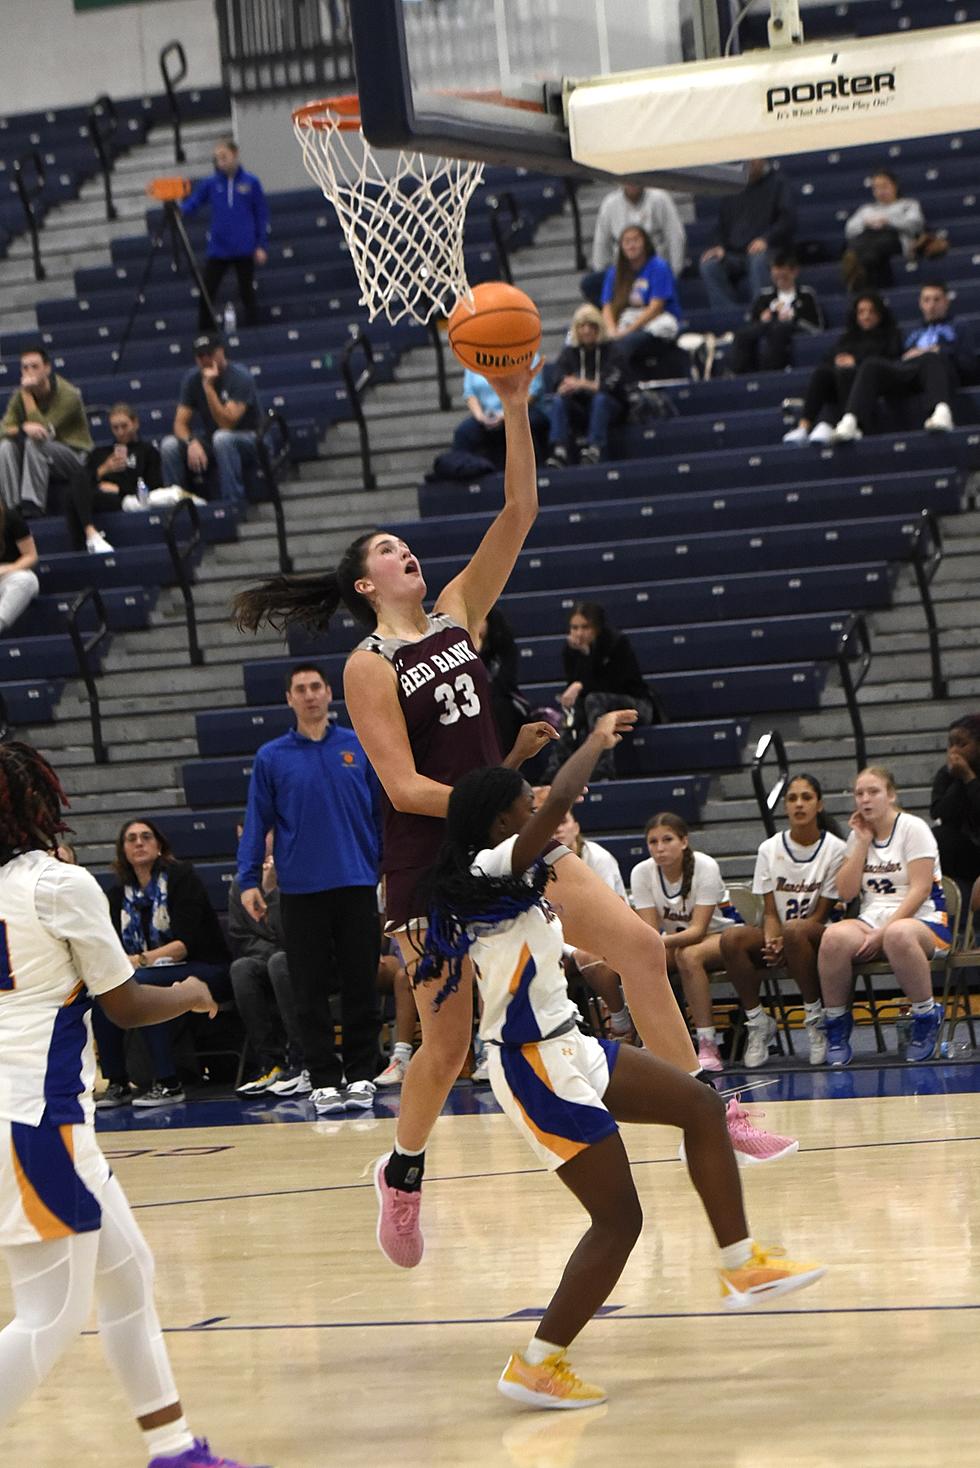 Girls Basketball &#8211; Red Bank Regional Holds Off Wall to Win Their First WOBM Christmas Classic 54-51